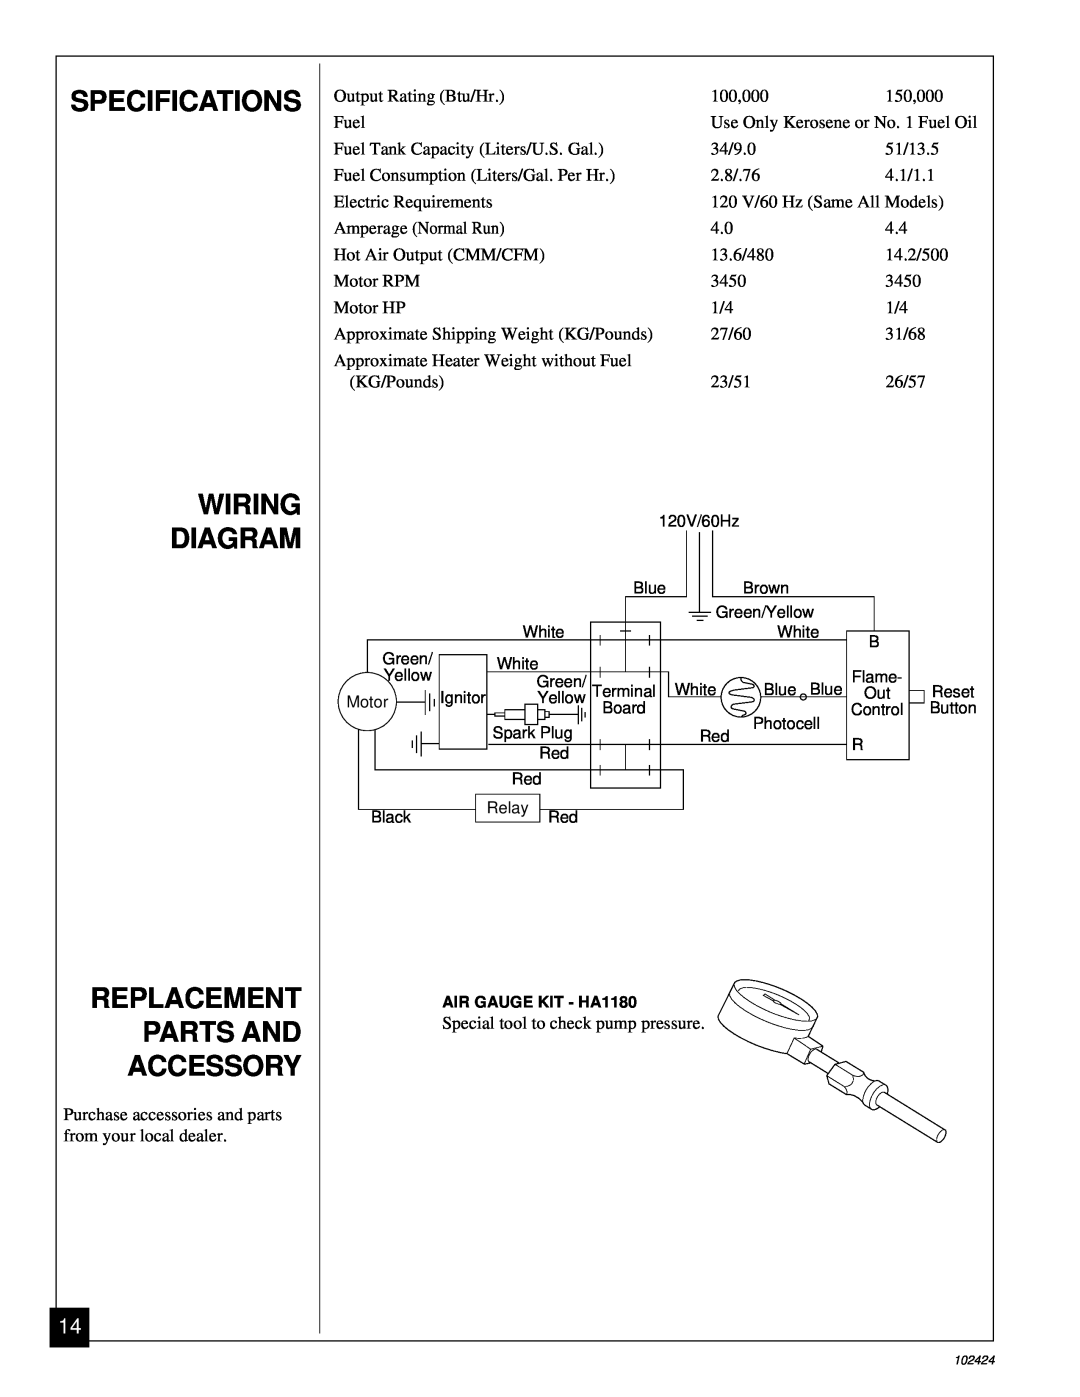 Desa BY150ECA owner manual Specifications Wiring Diagram, Replacement Parts And Accessory 